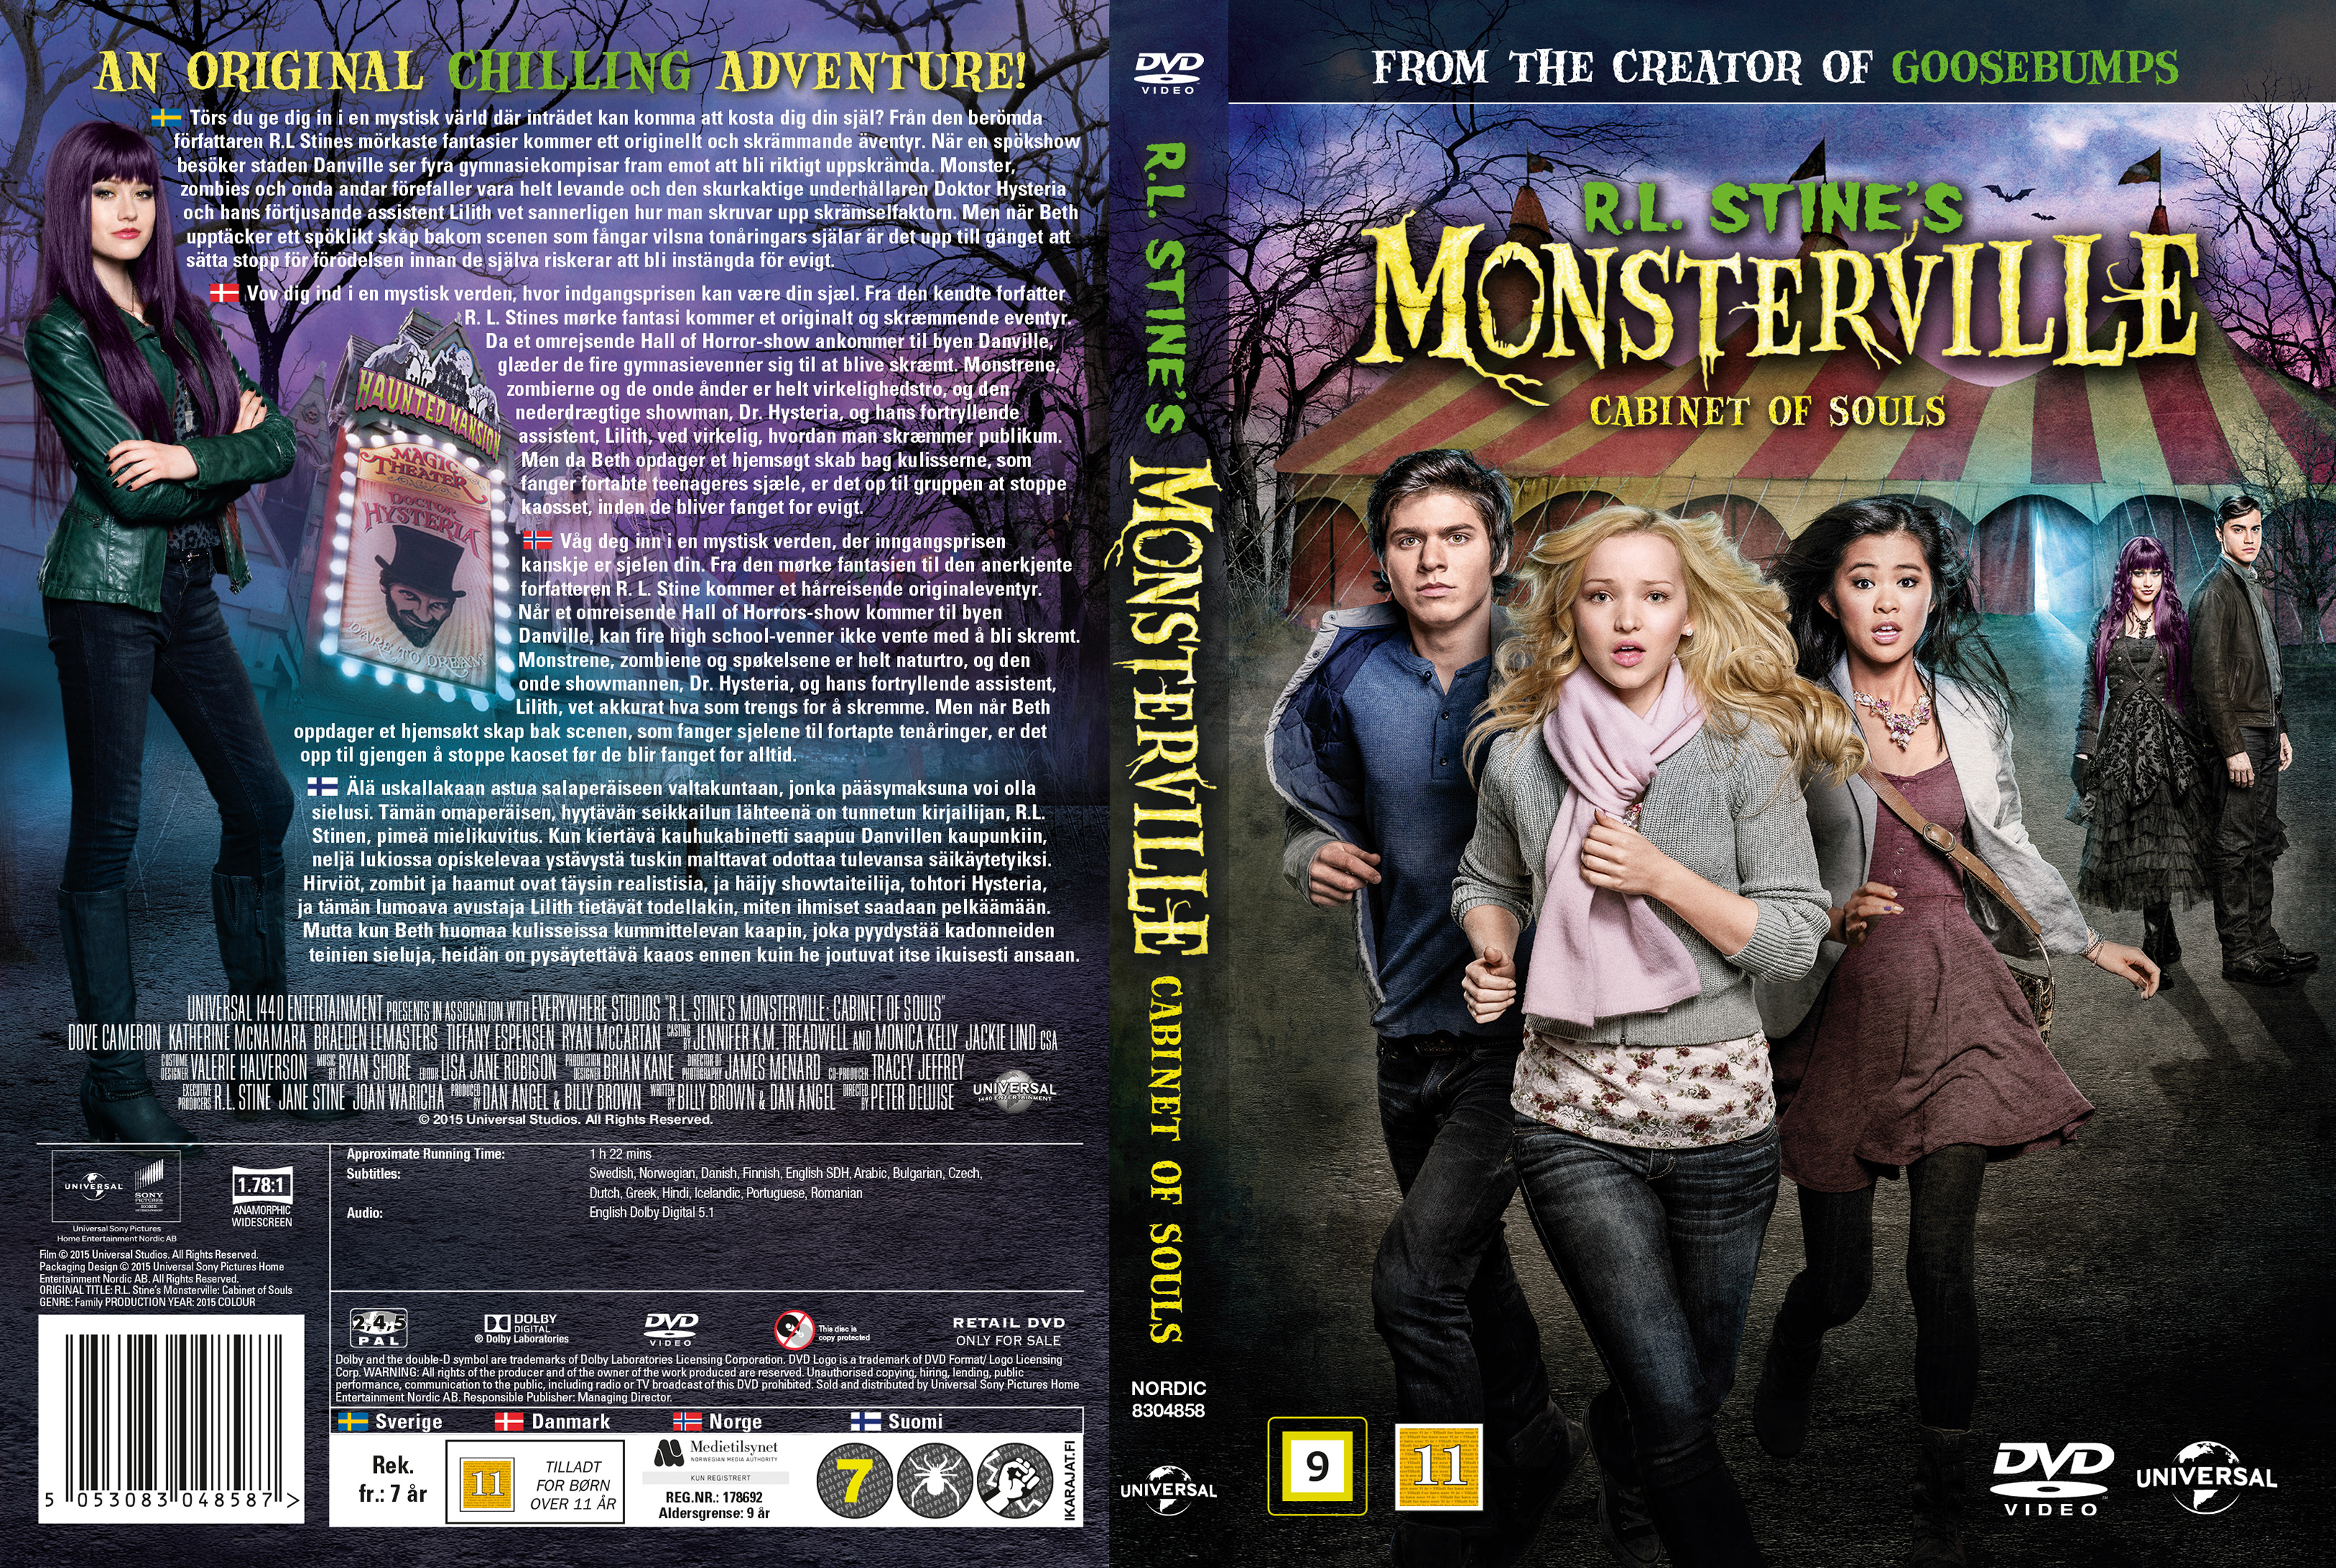 Watch r.l. stine's monsterville: the cabinet of souls